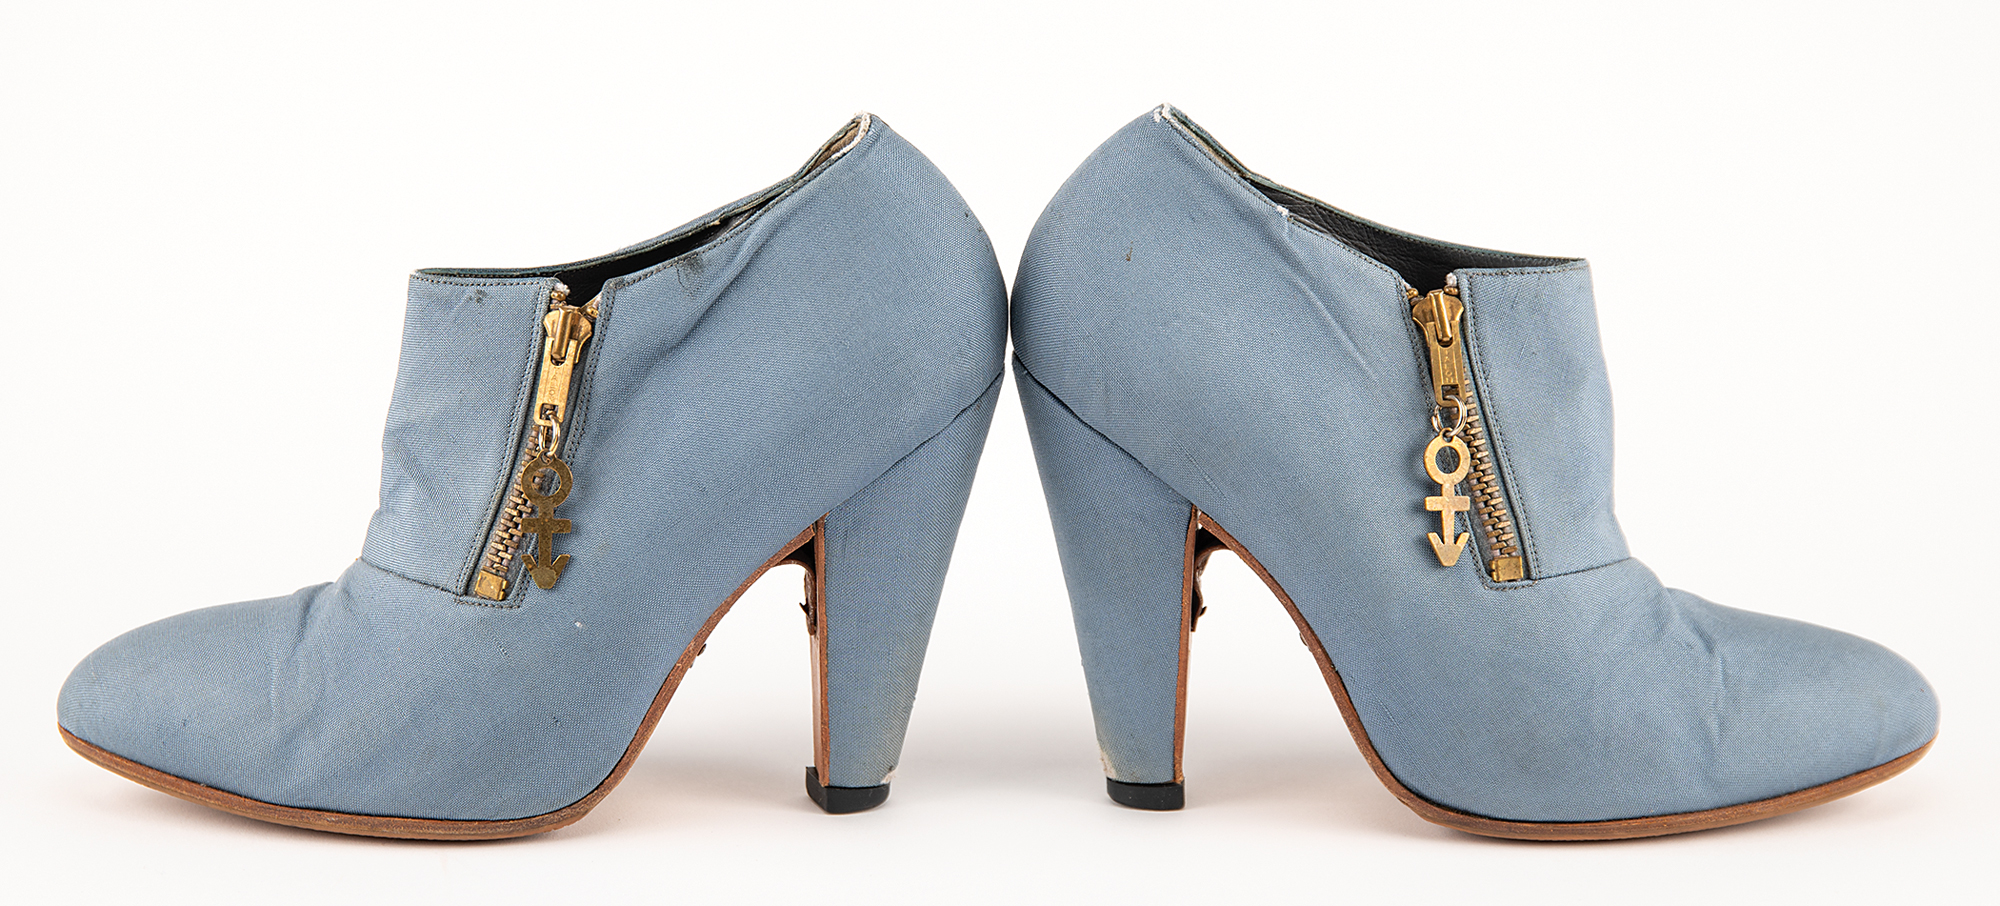 Prince's Stage-Worn Iconic High-Heeled Blue Boots from the Act I